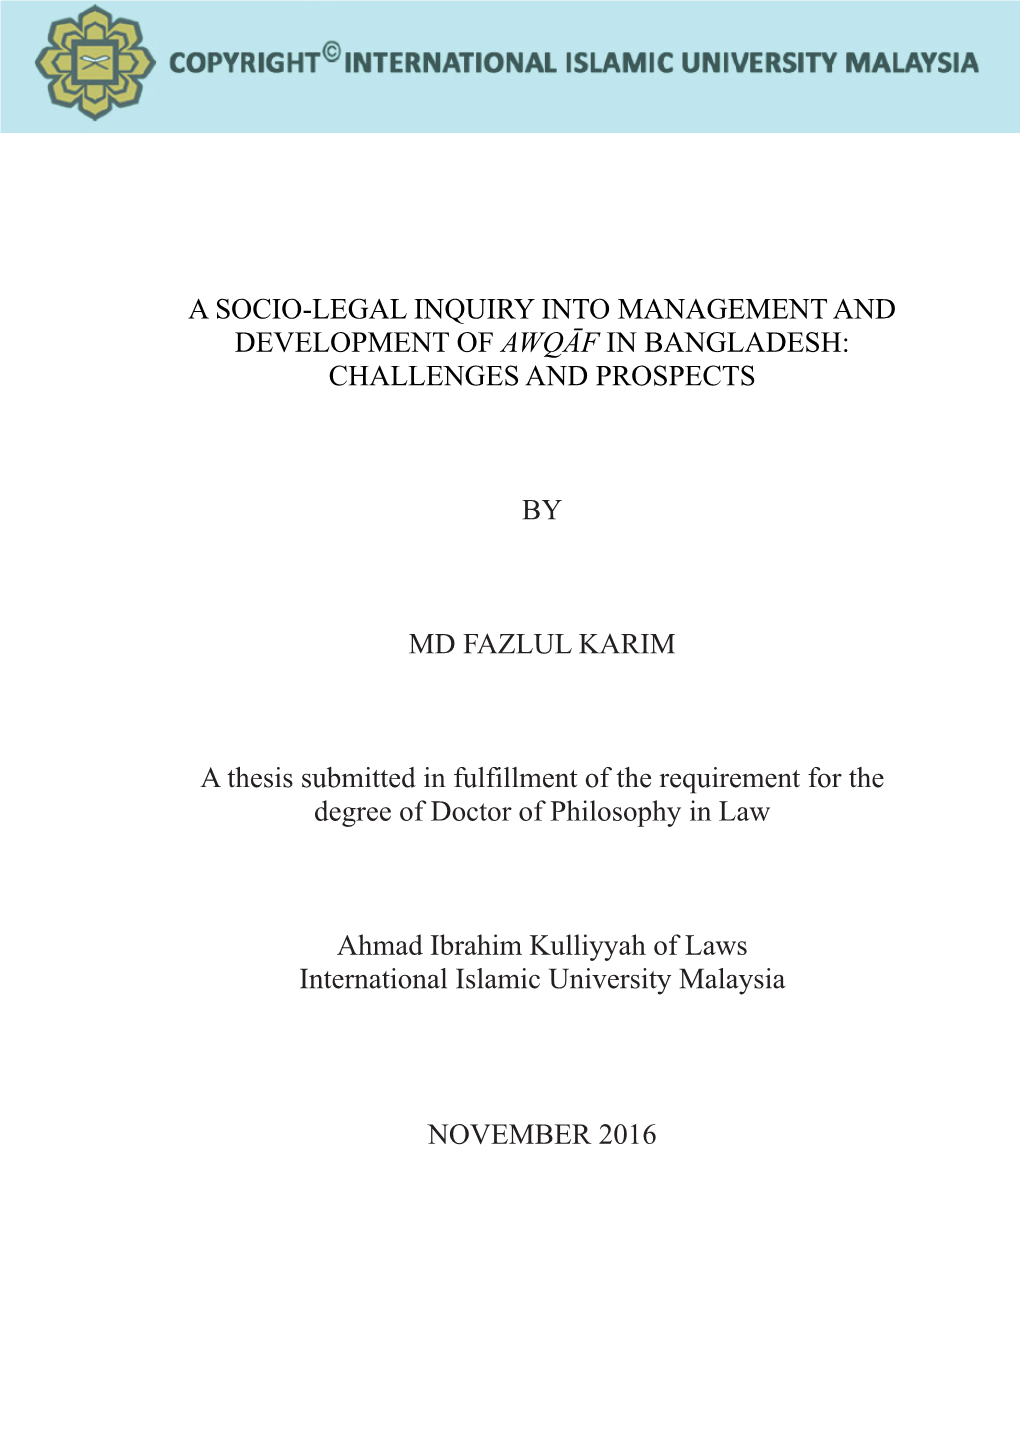 A Socio-Legal Inquiry Into Management and Development of Awqāf in Bangladesh: Challenges and Prospects